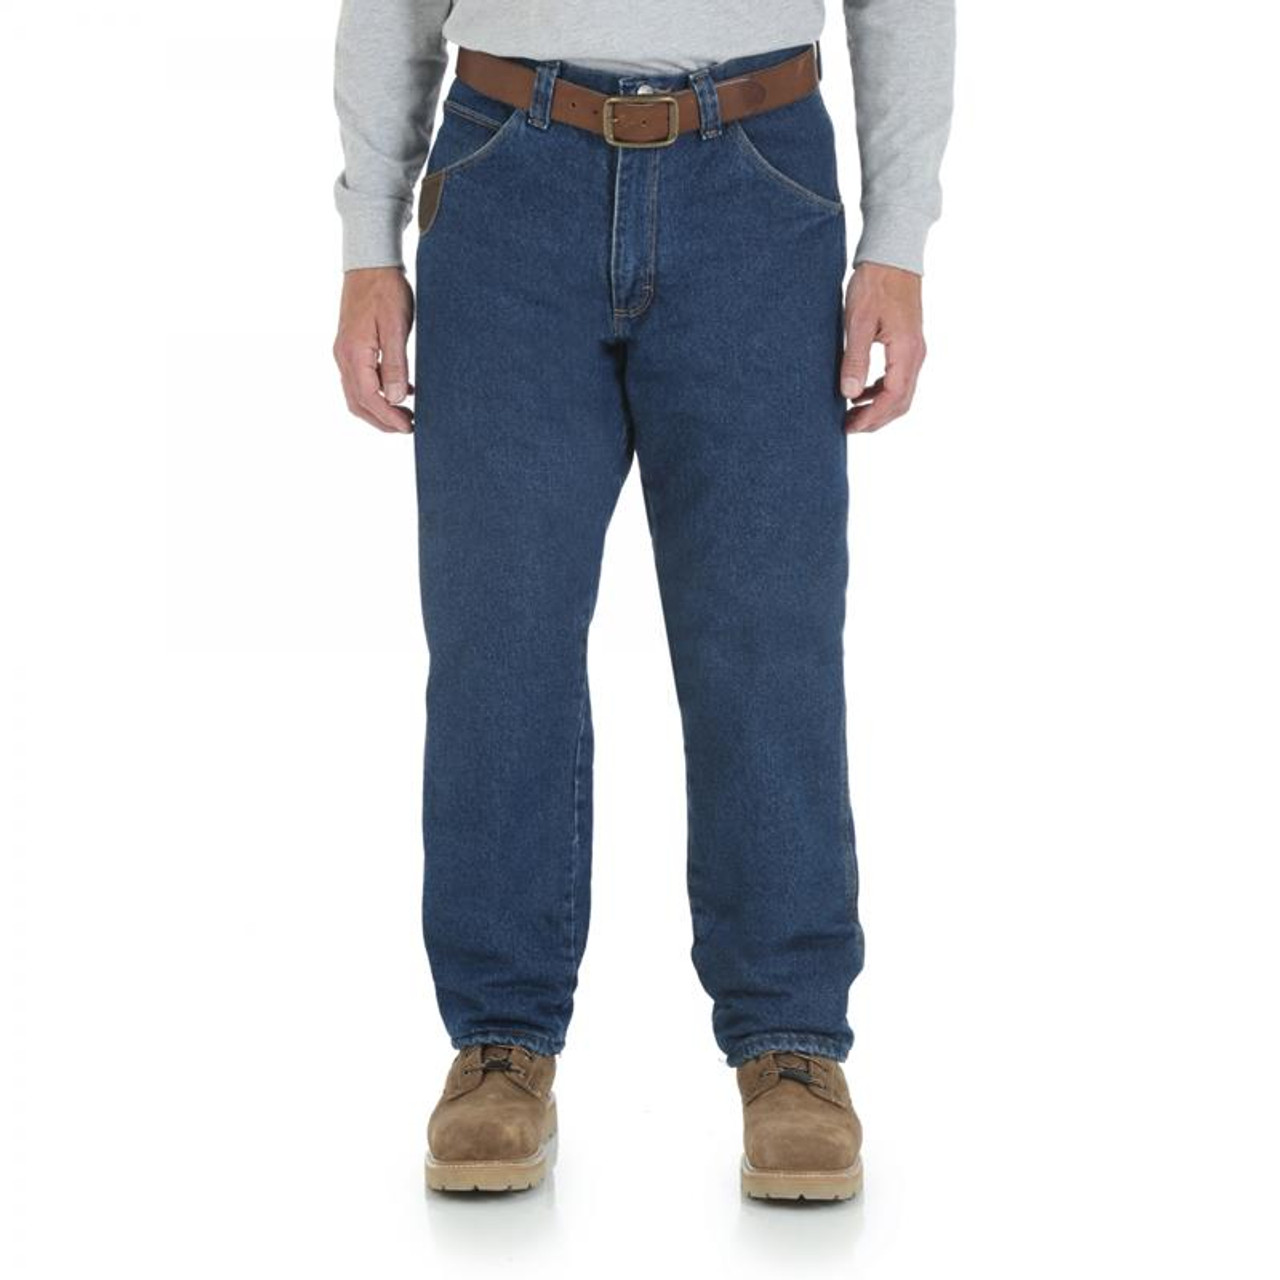 Wrangler- RIGGS WORKWEAR Lined Relaxed Fit Jean- Denim